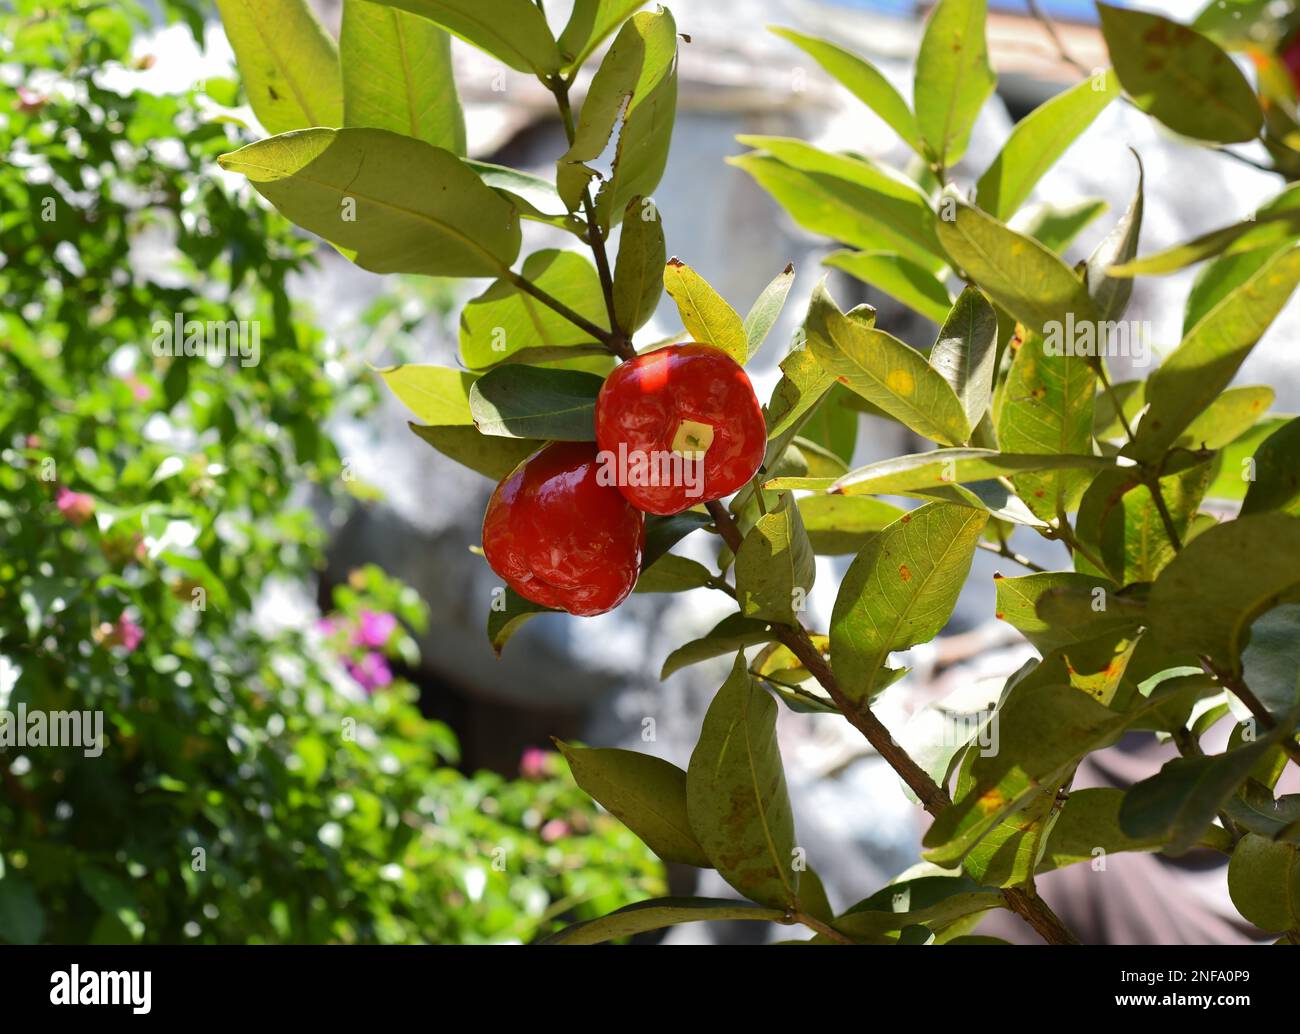 Syzygium jambos known as Rose apple and pomarrosa growing in Vietnam Stock Photo